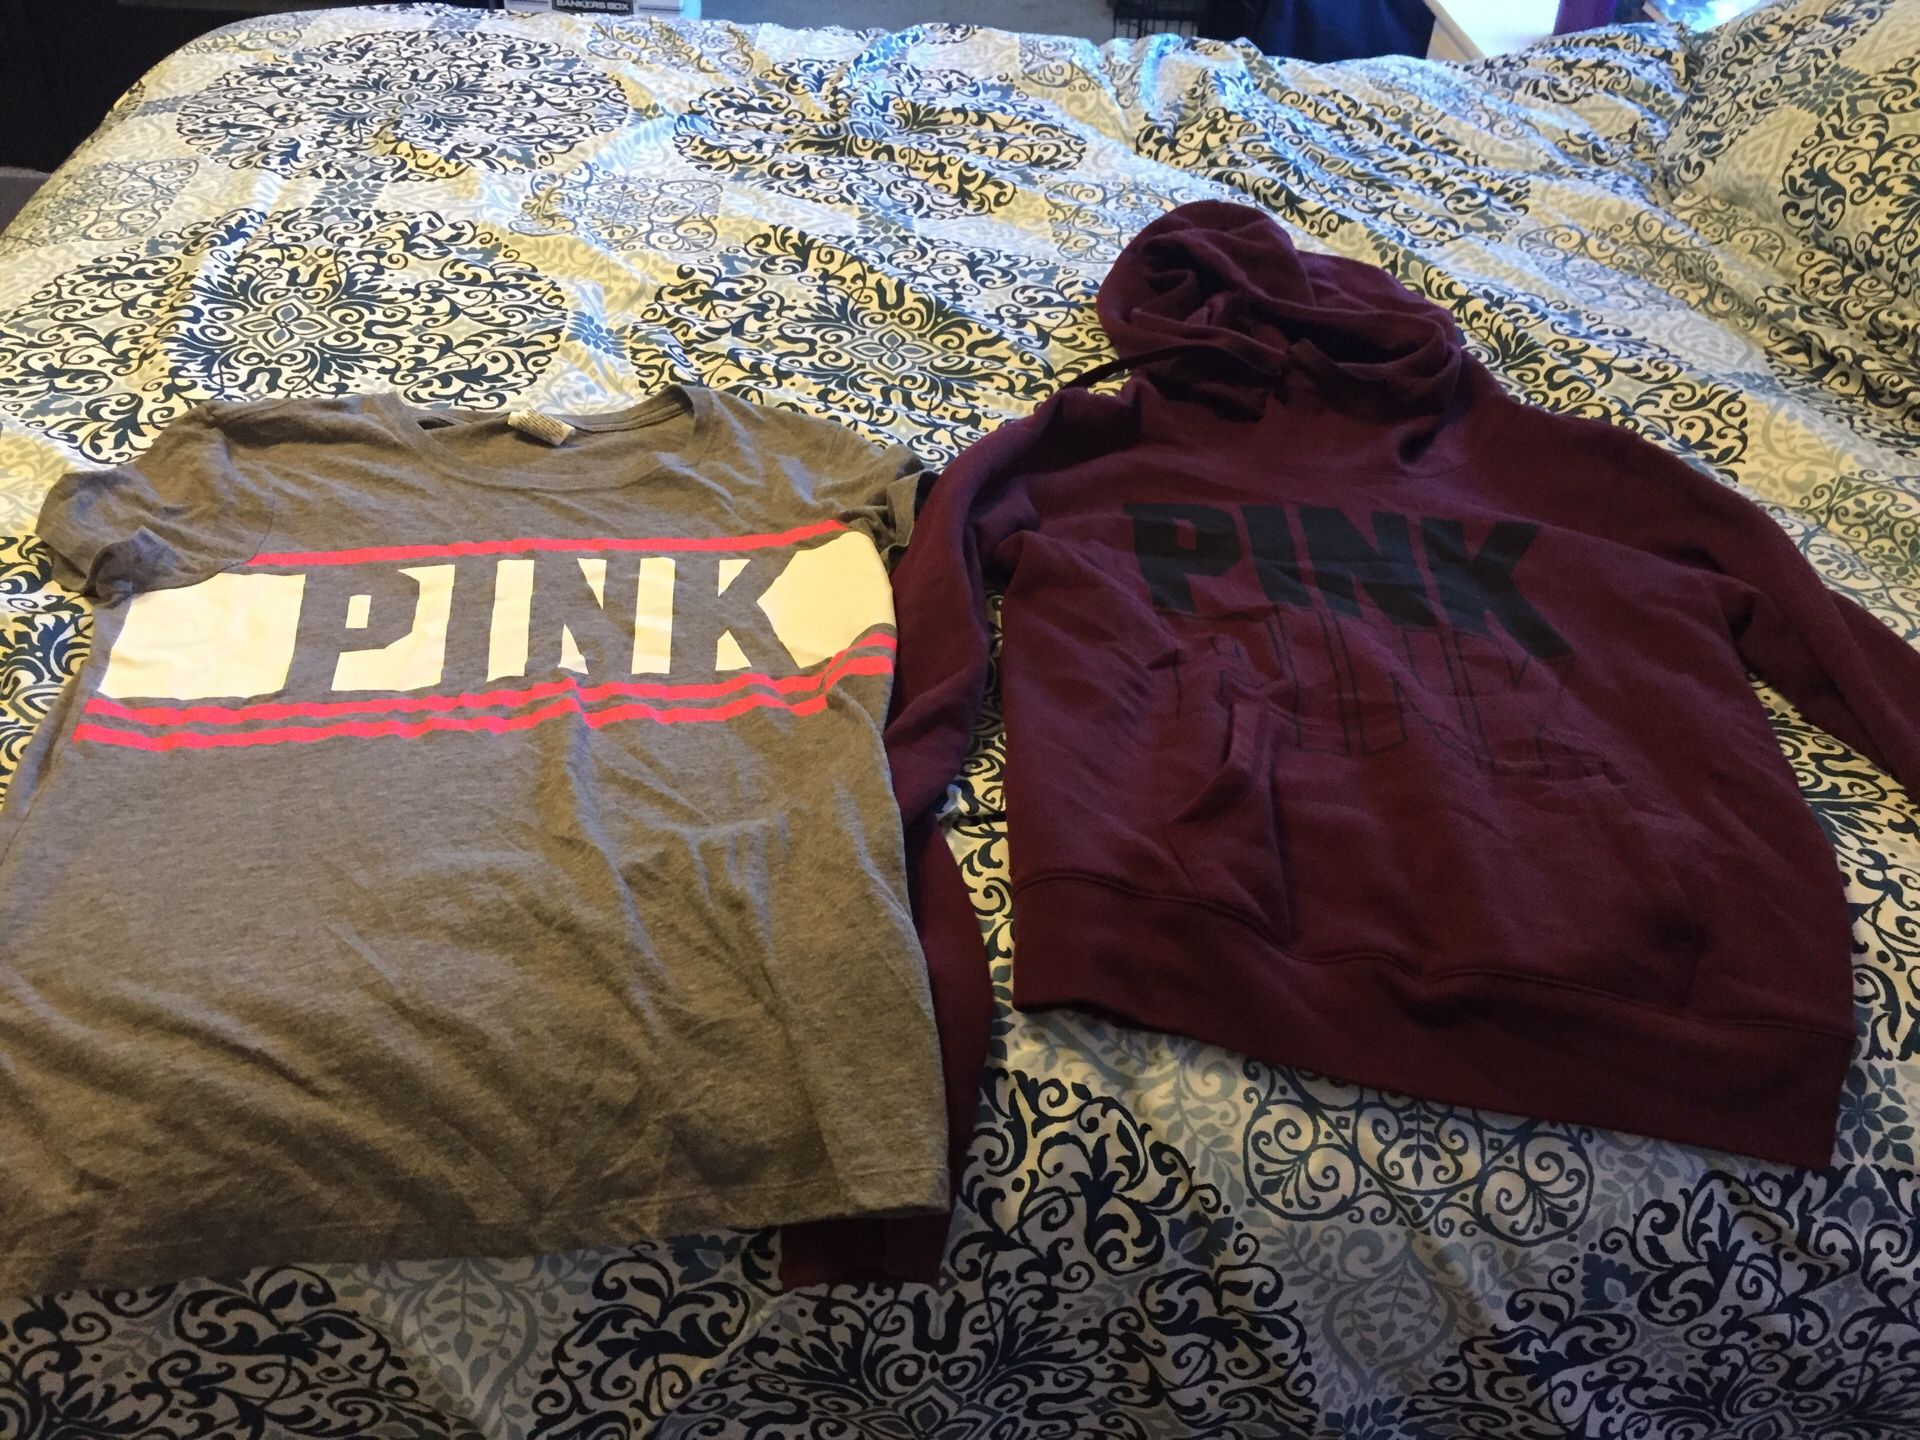 Pink brand clothes